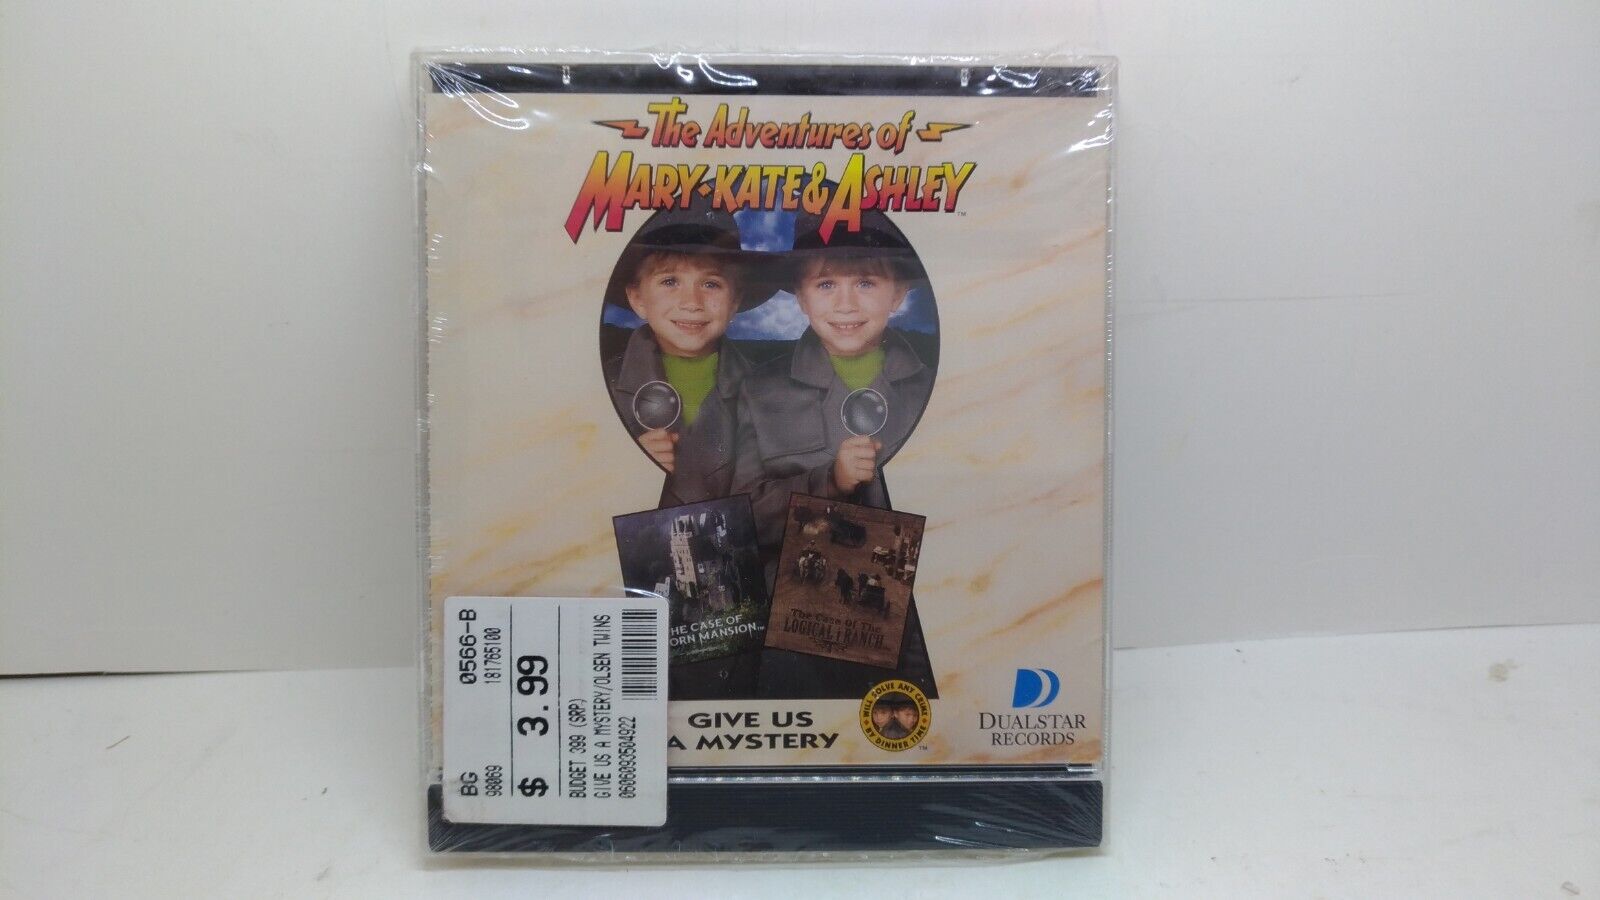 The Adventures of Mary Kate and Ashley Olsen - Give Us a Mystery (CD, Dualstar)